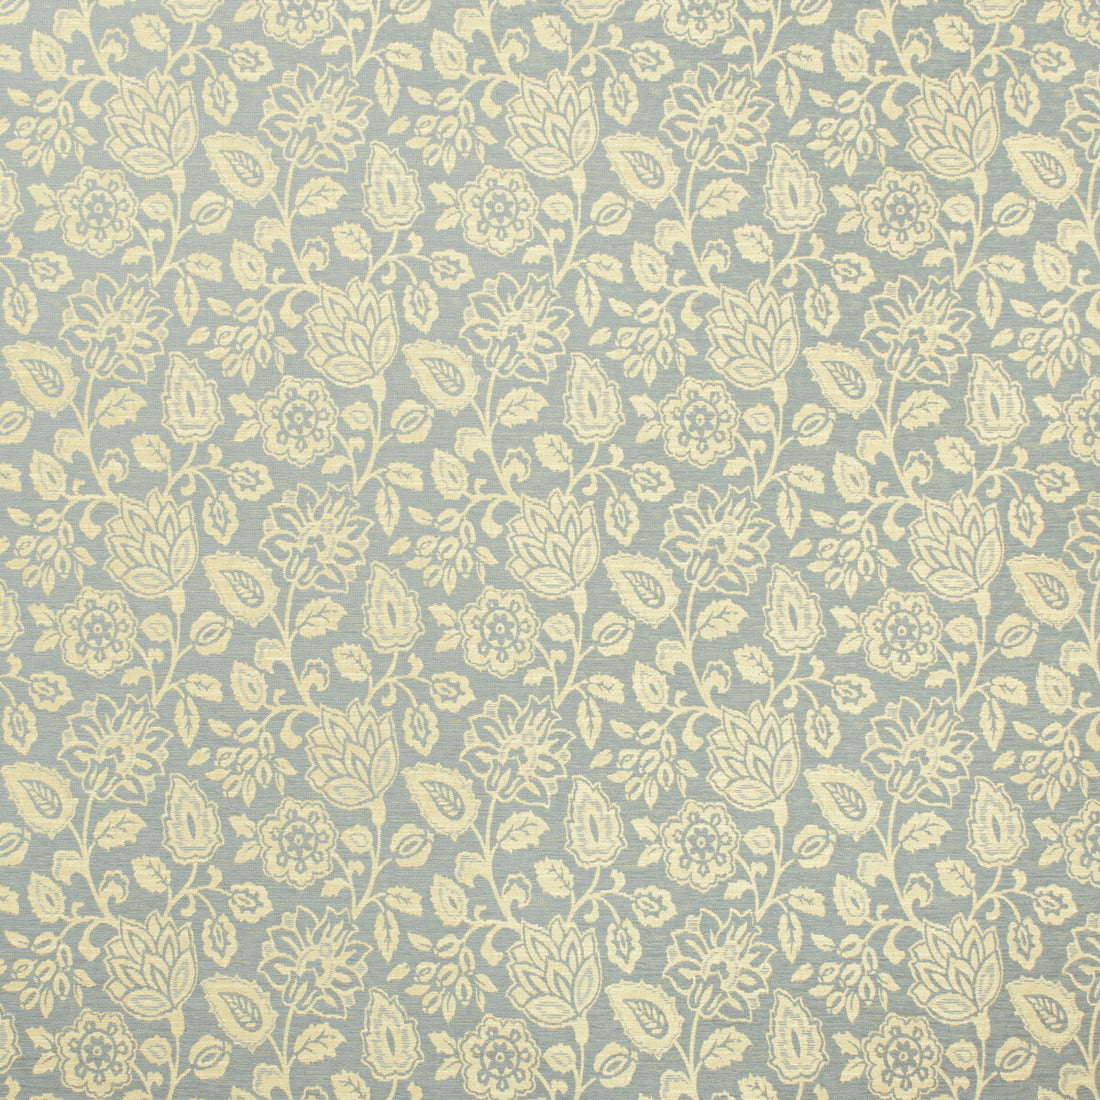 Kf Ctr fabric - pattern 35863.421.0 - by Kravet Contract in the Gis Crypton collection